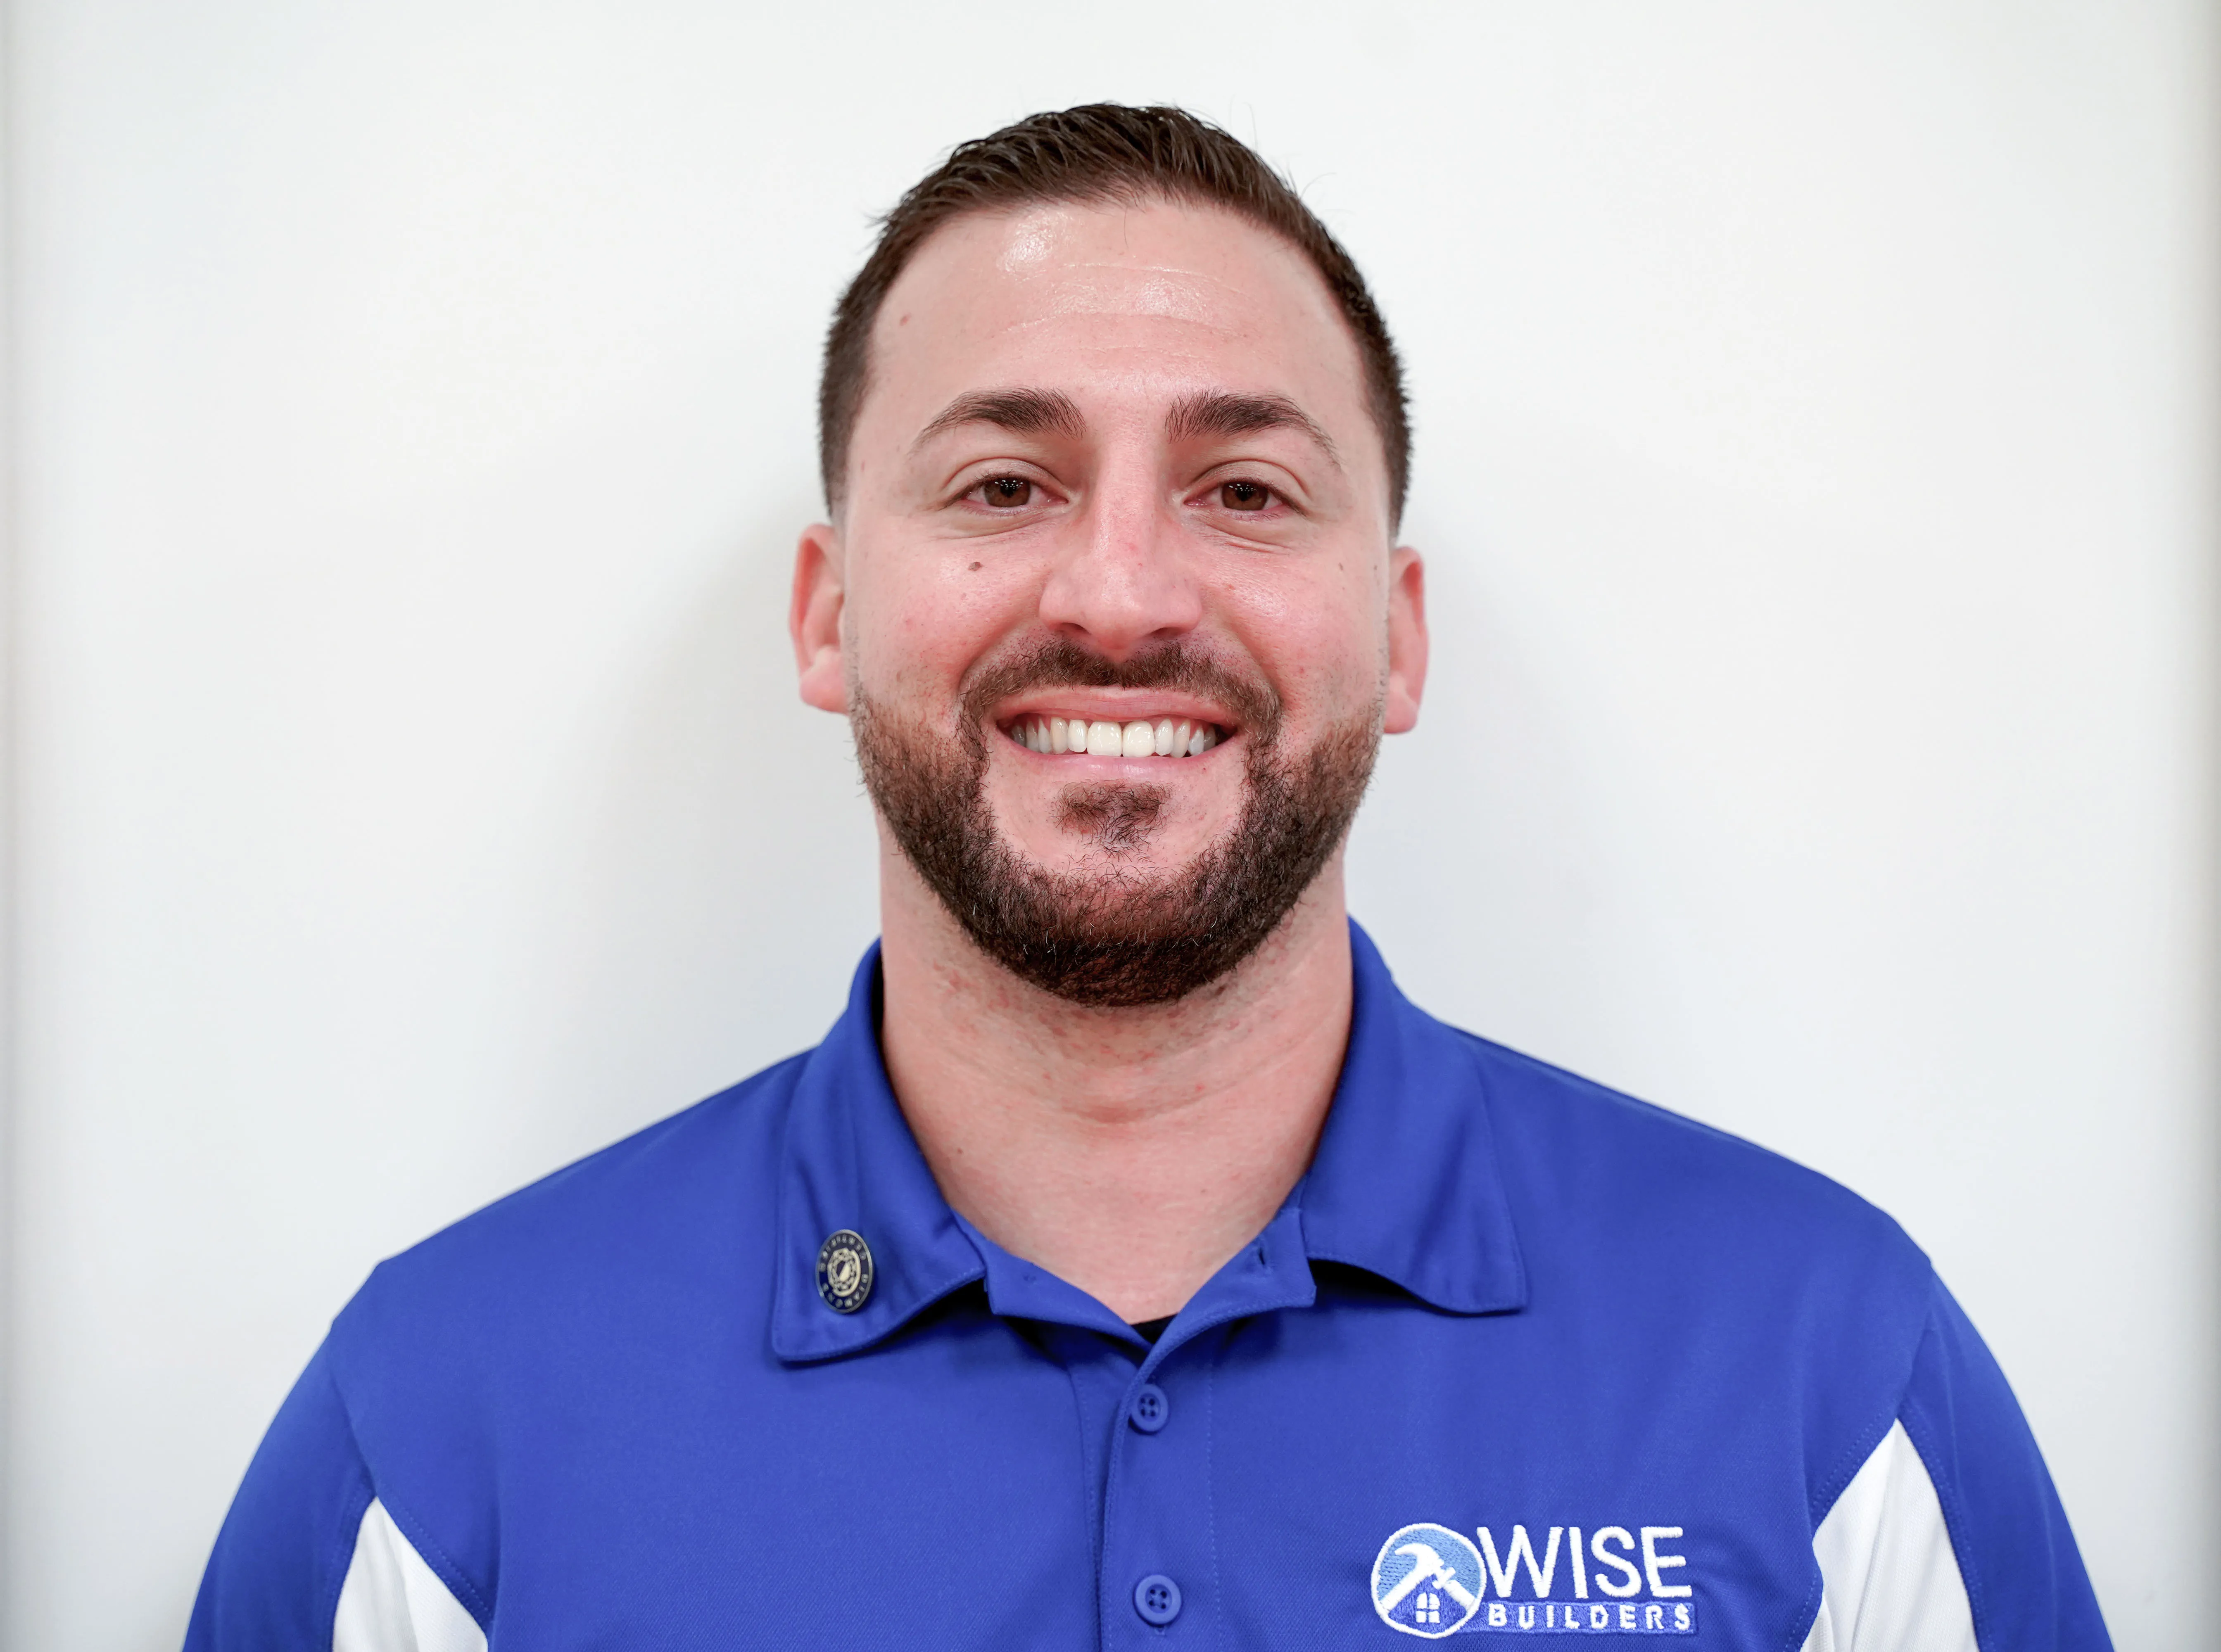 Nathan Weizmann is owner of  Wise Builders Remodeling, Inc., a Diamond Certified company. He can be reached at (408) 874-6945 or wisebuildersremodeling@gmail.com.
